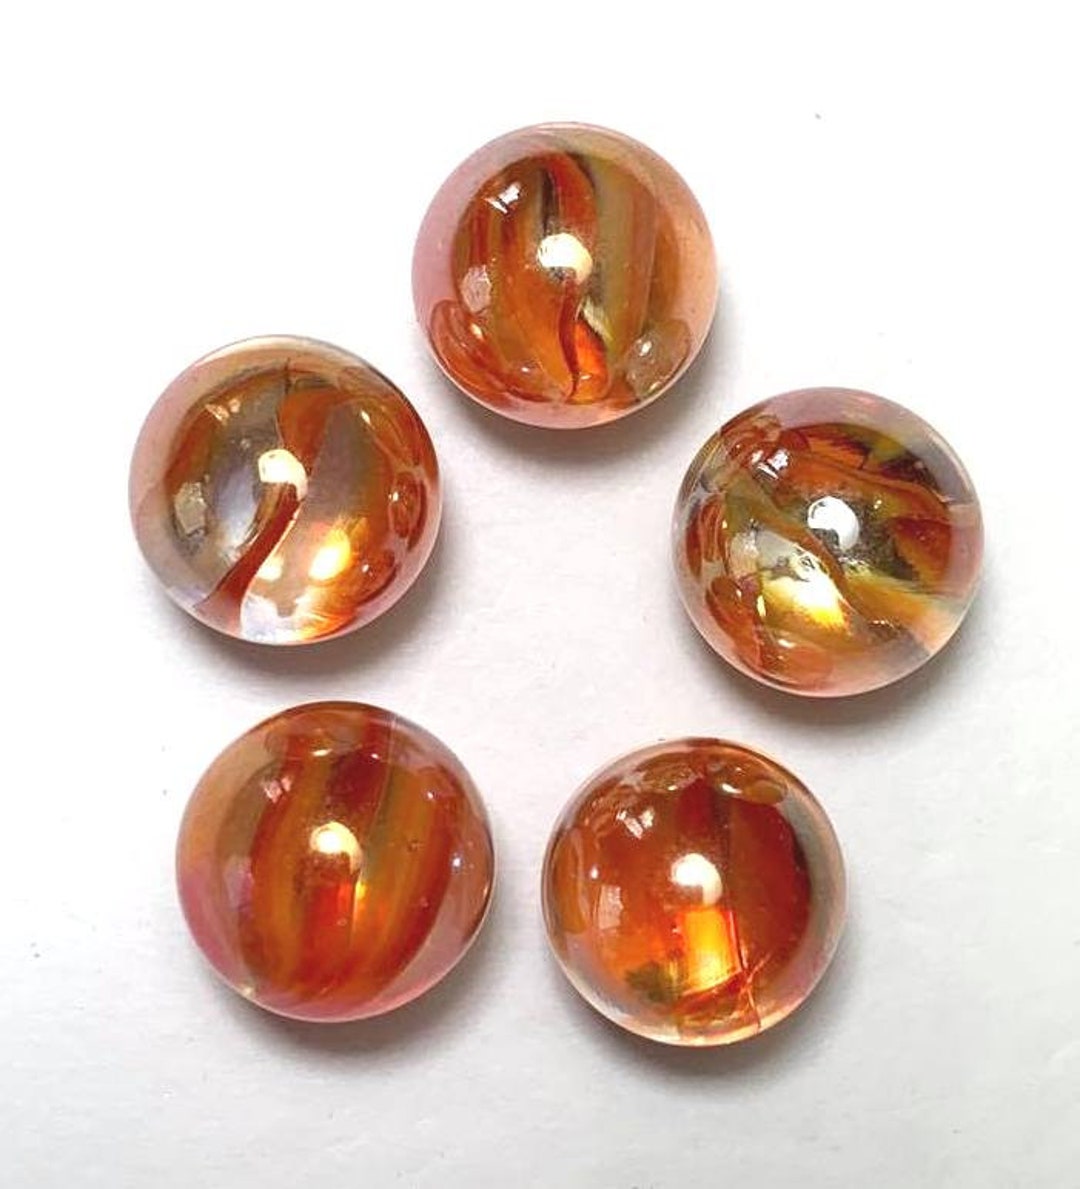 8mm 10mm 12mm 14mm Fried Orange Cracked Glass stones / marbles for  interchangeable jewelry